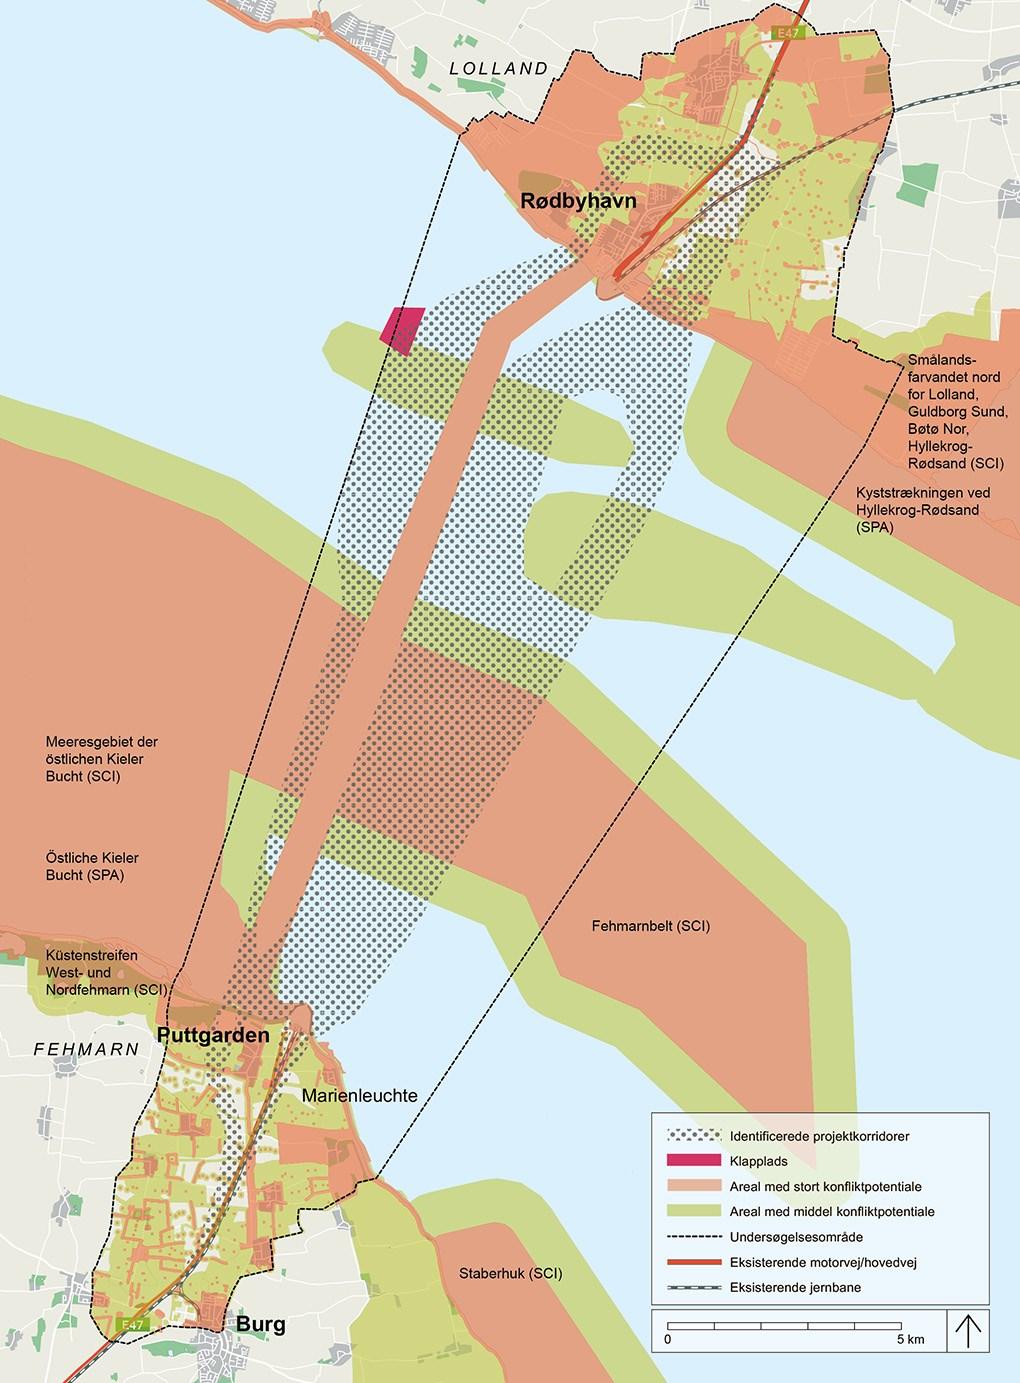 FIGURE 4.3 Conflict potential between the coast-to-coast project and environmental interests. Areas without a coloured sign were assessed as having low conflict potential 4.1.